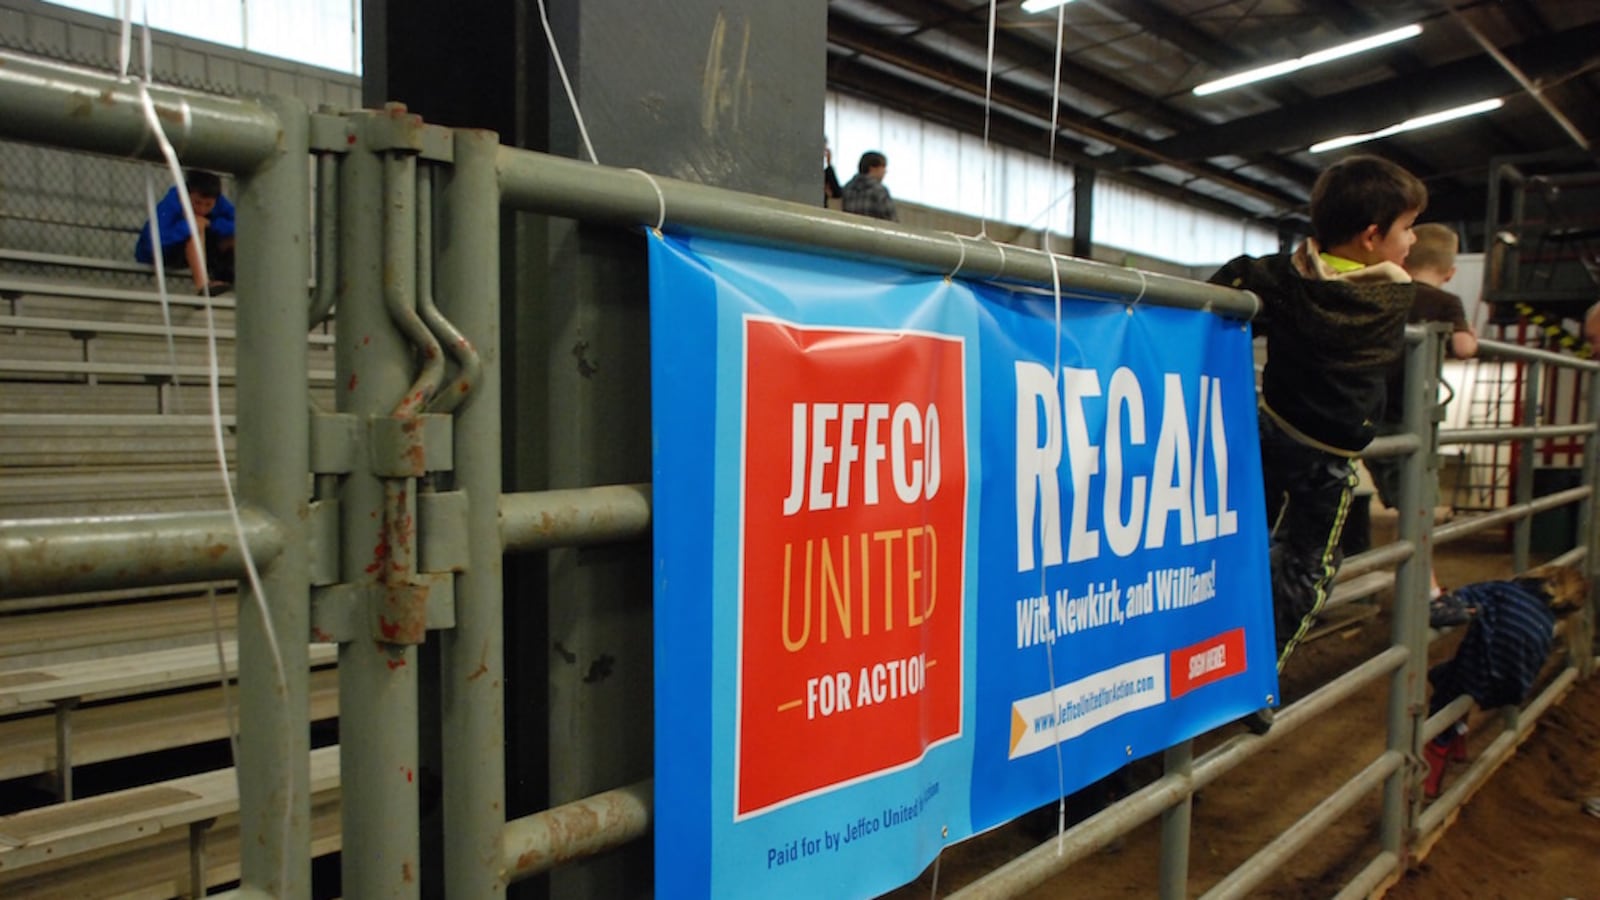 Dozens of young Jefferson County residents ran through the barn and climbed on rails during a campaign rally July 8.